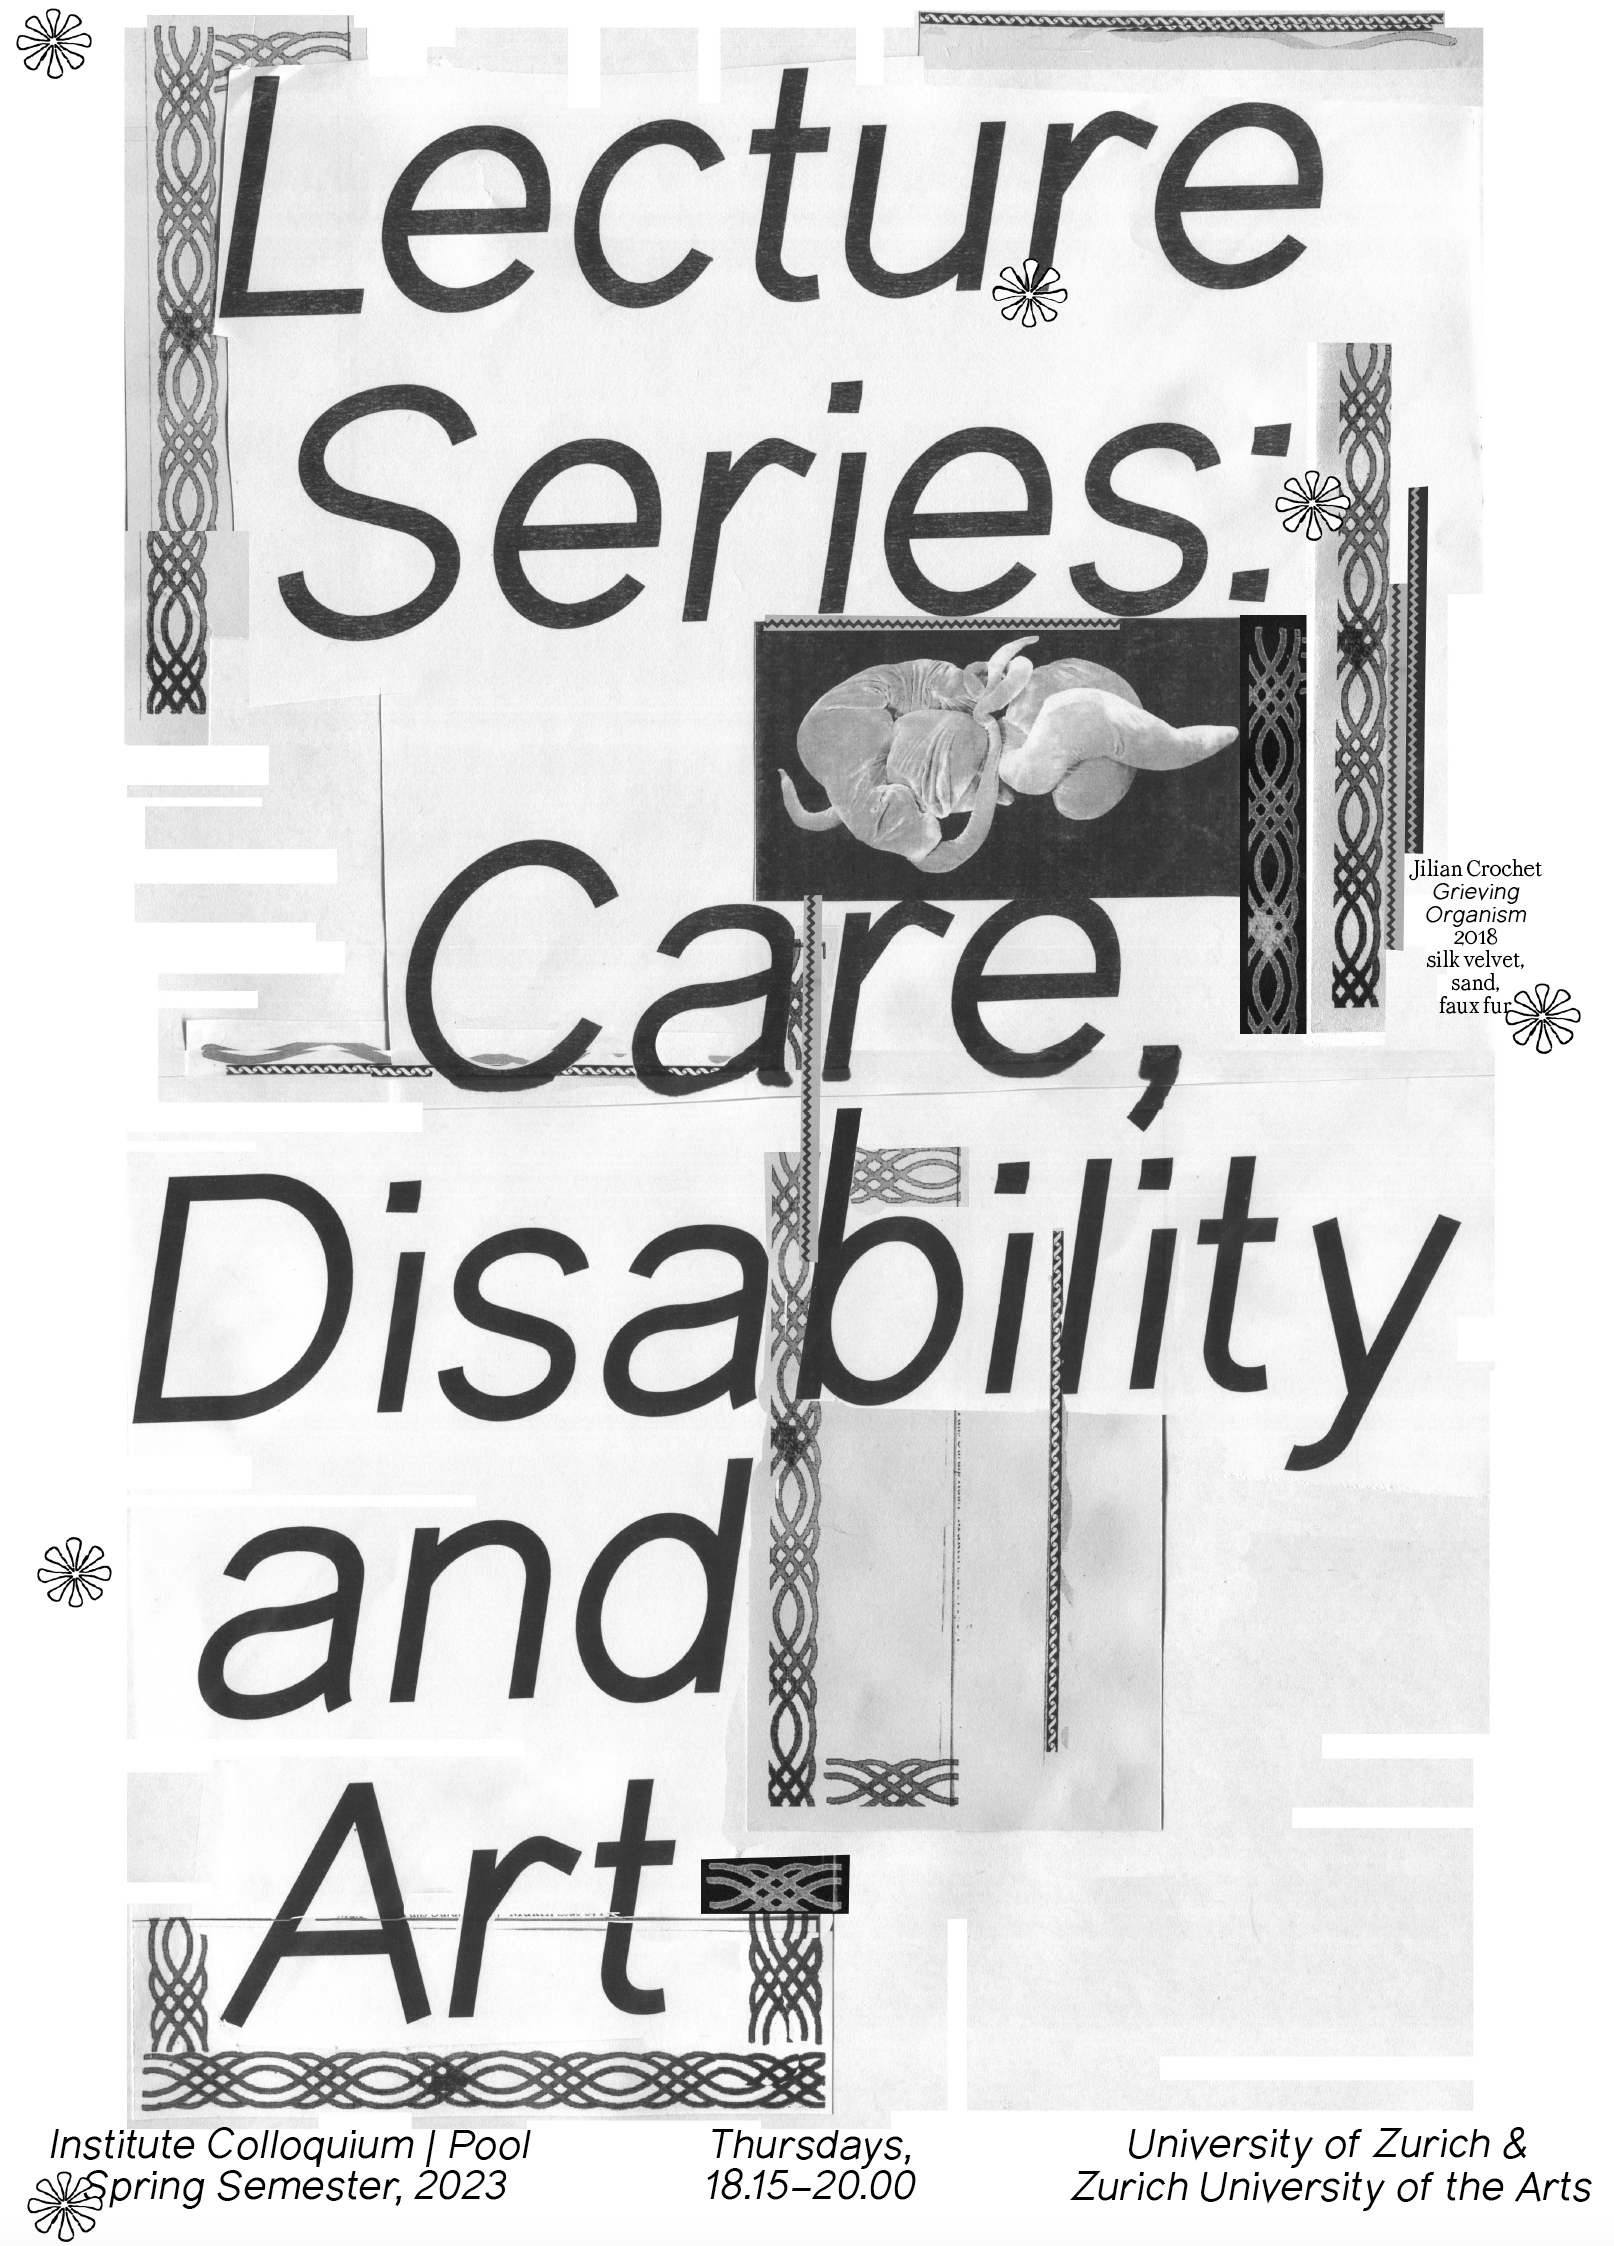 Lecture Series: Care, Disability and Art